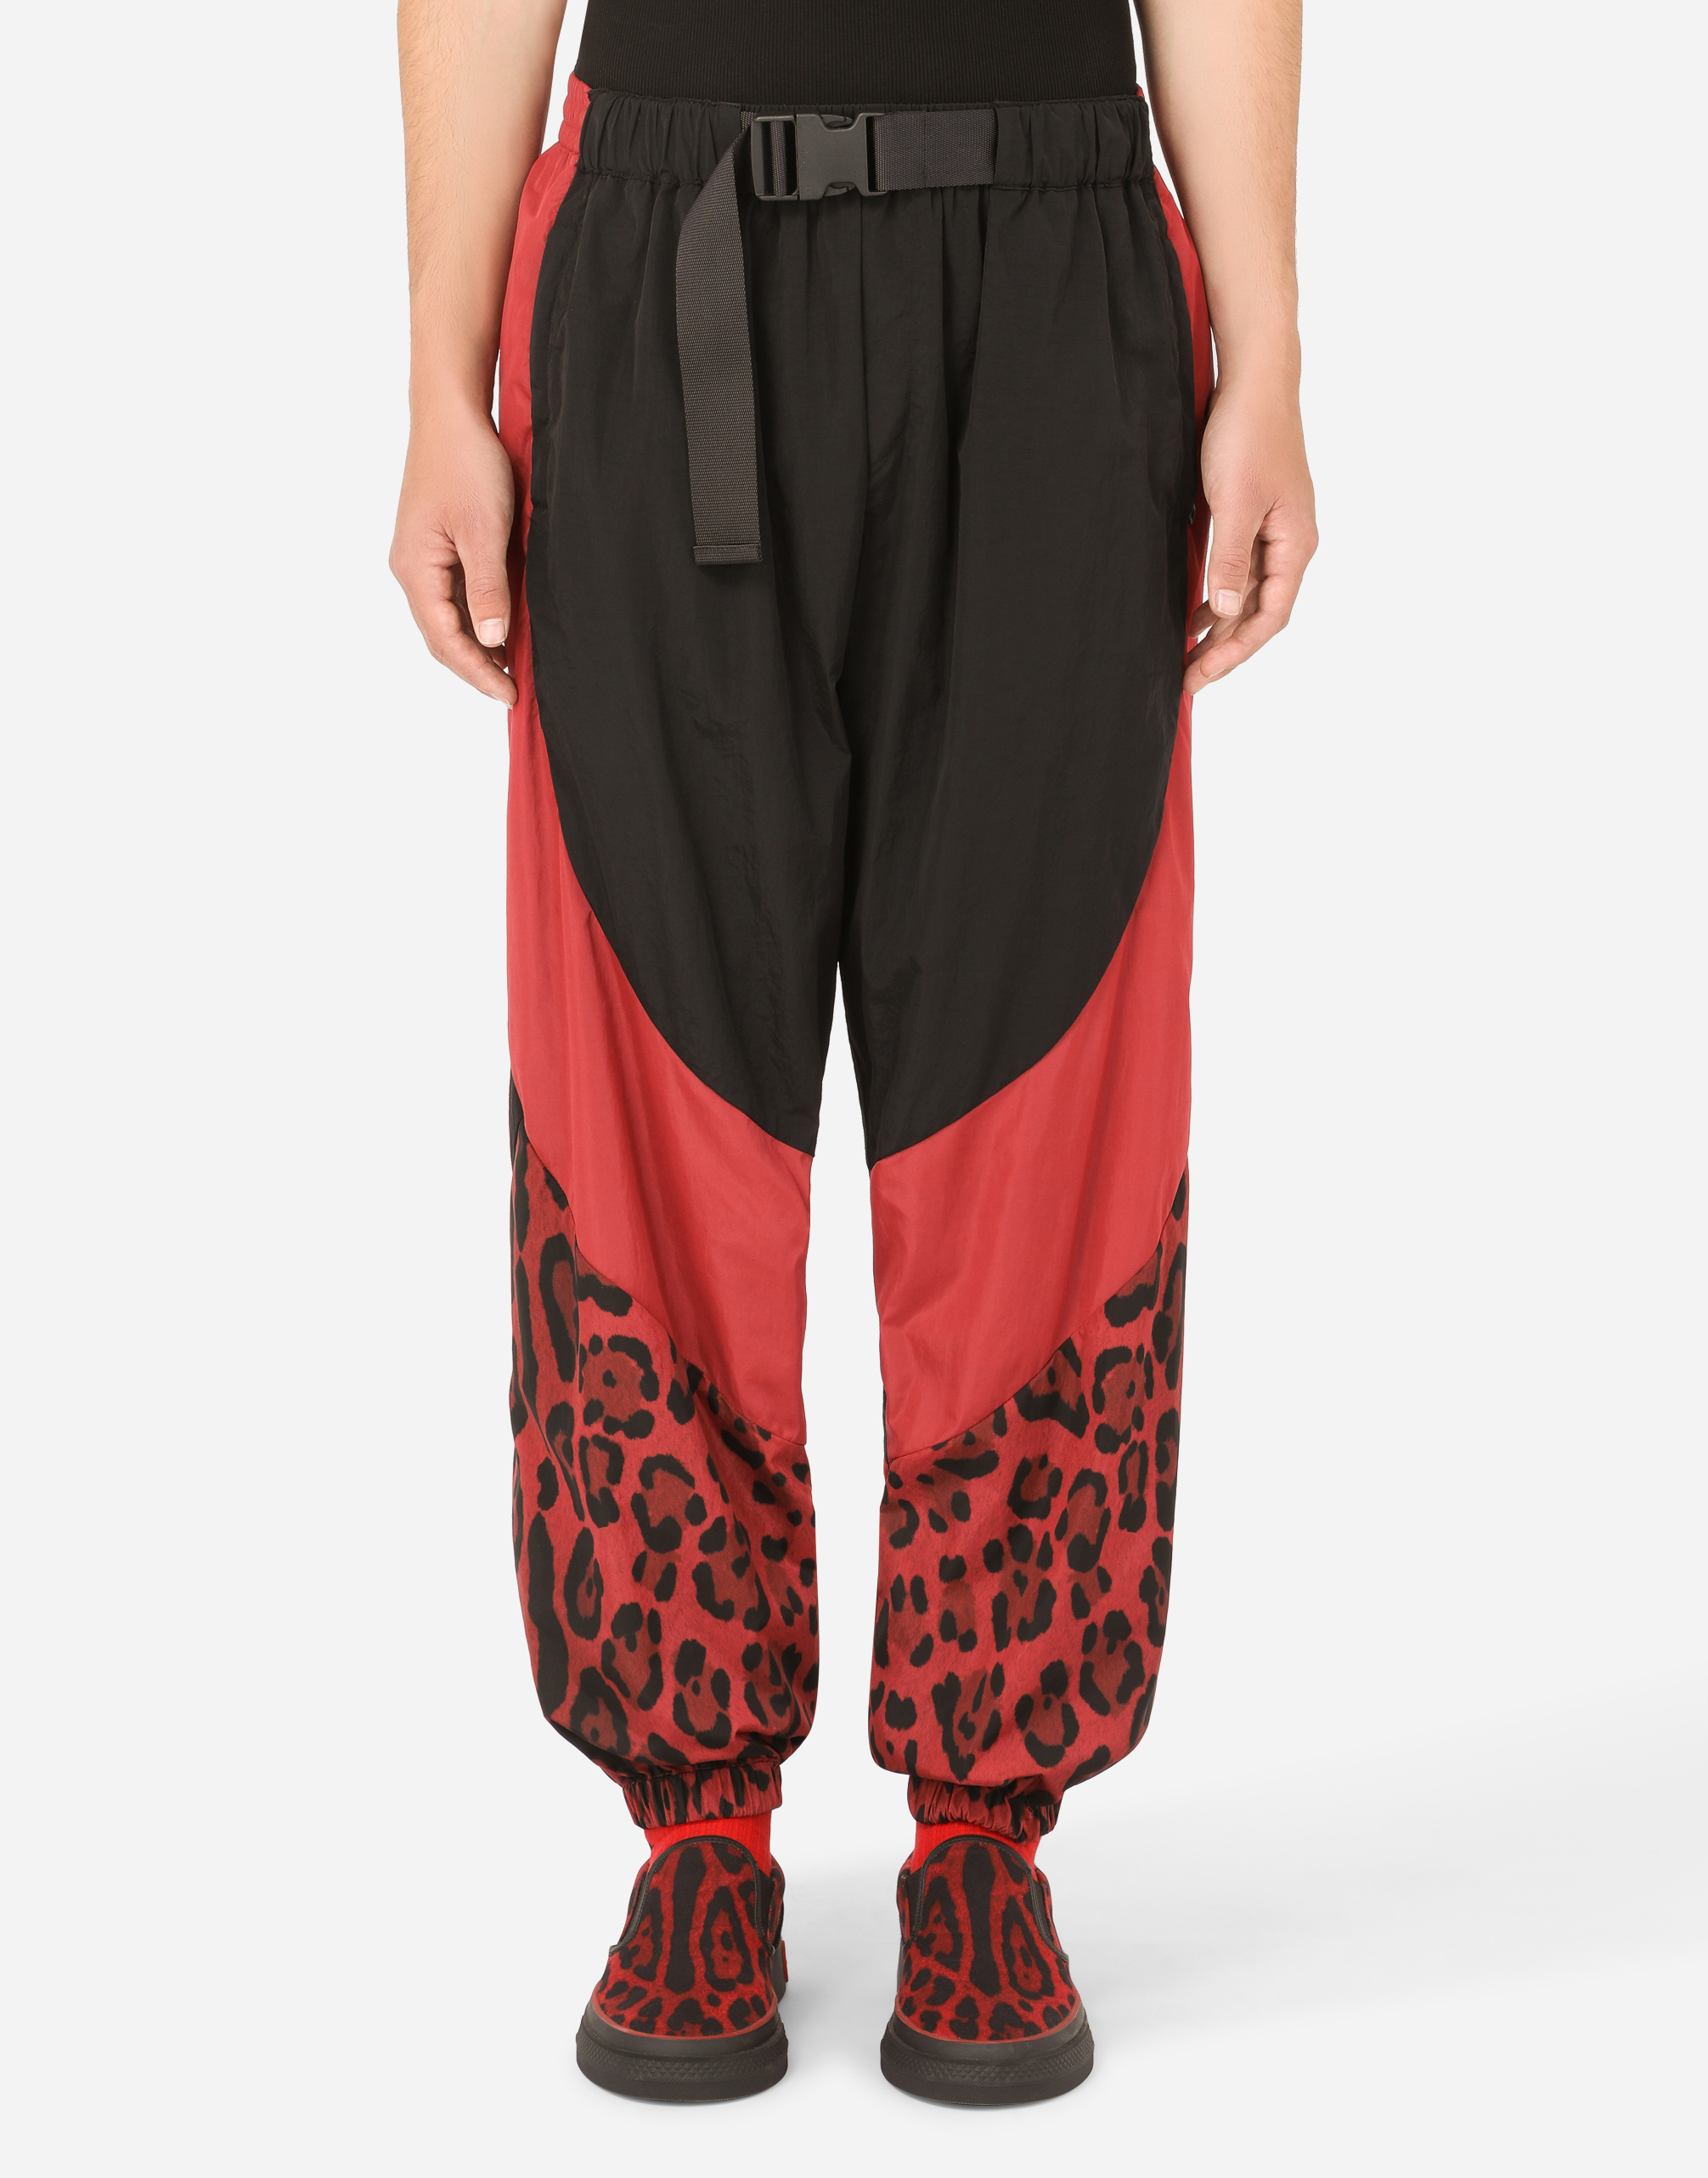 Nylon jogging pants with leopard print in Multicolor